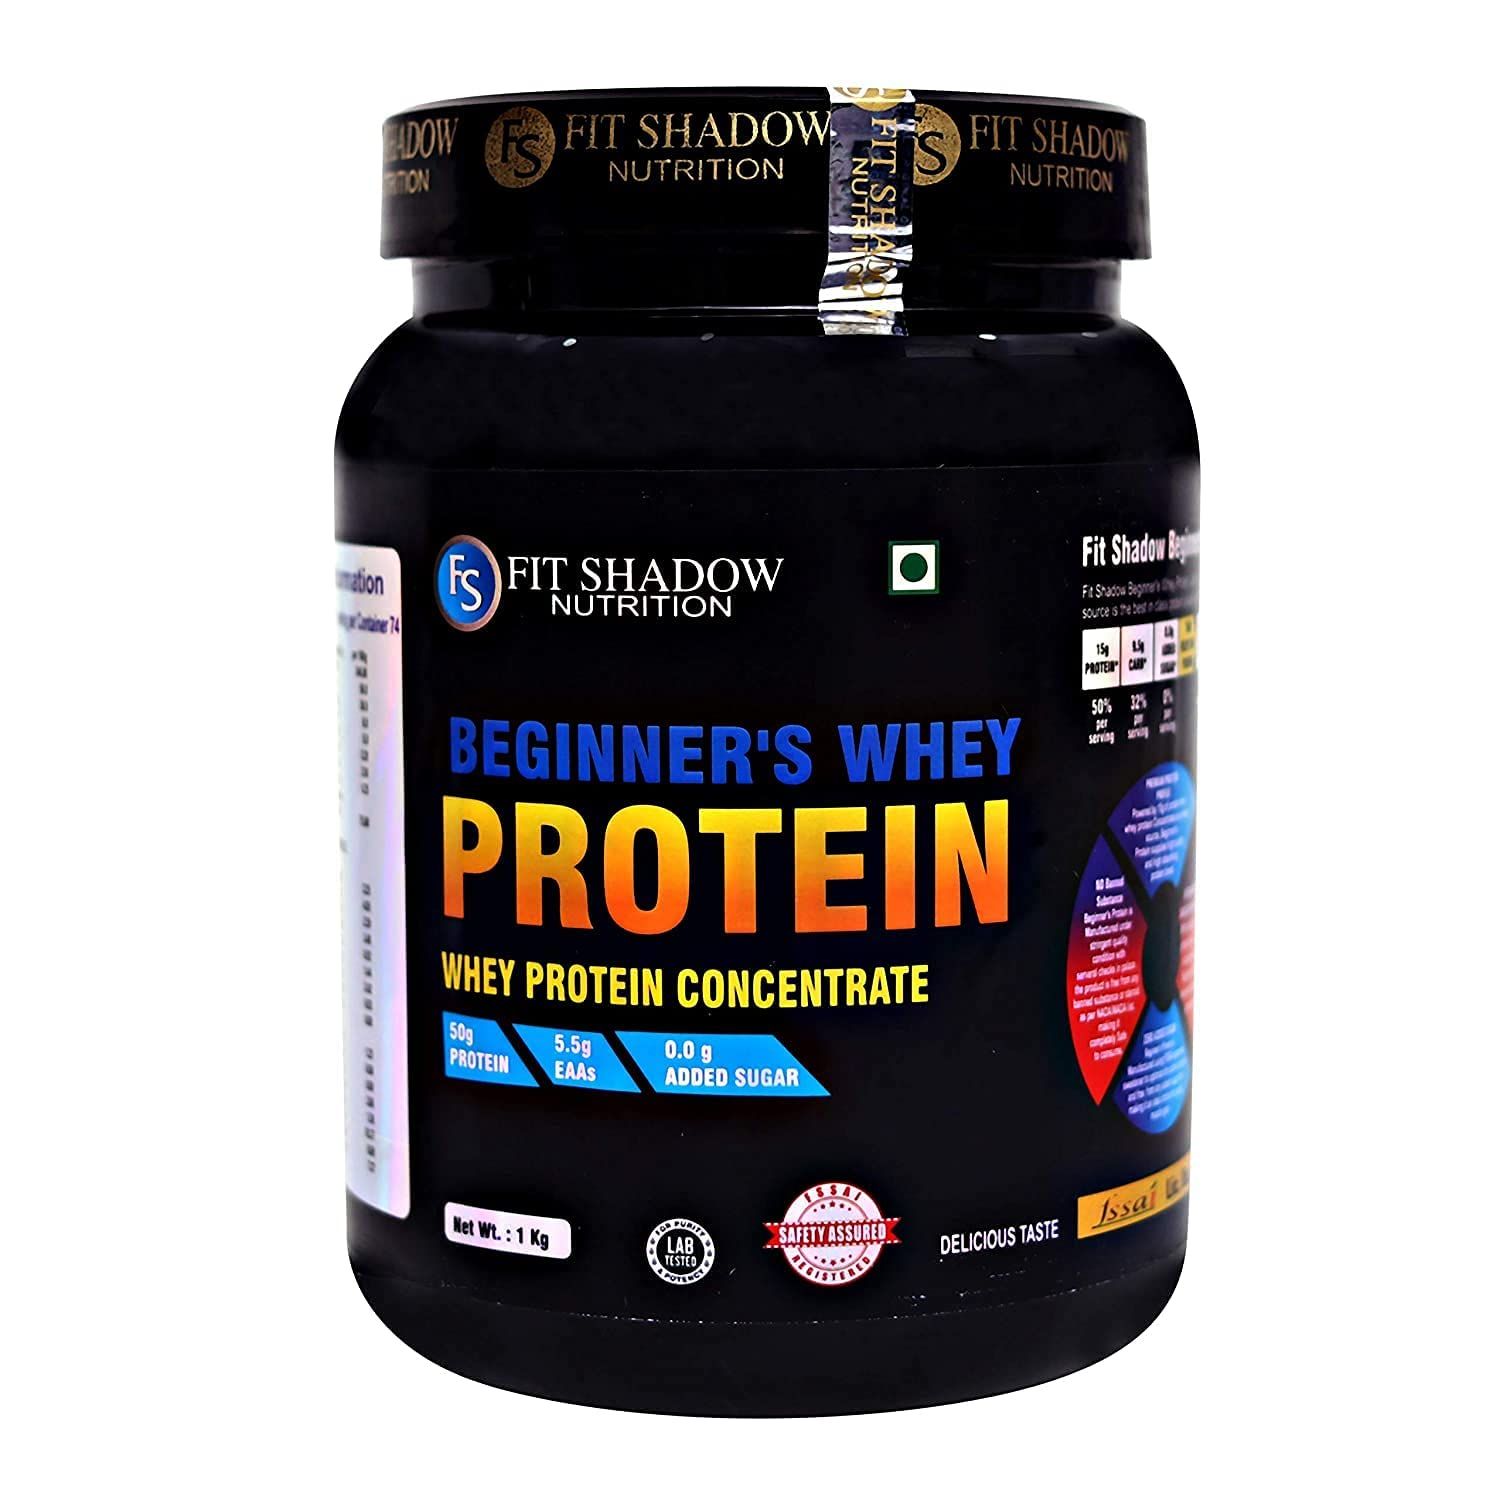 Fit Shadow Nutrition Beginner's Whey Protein Image